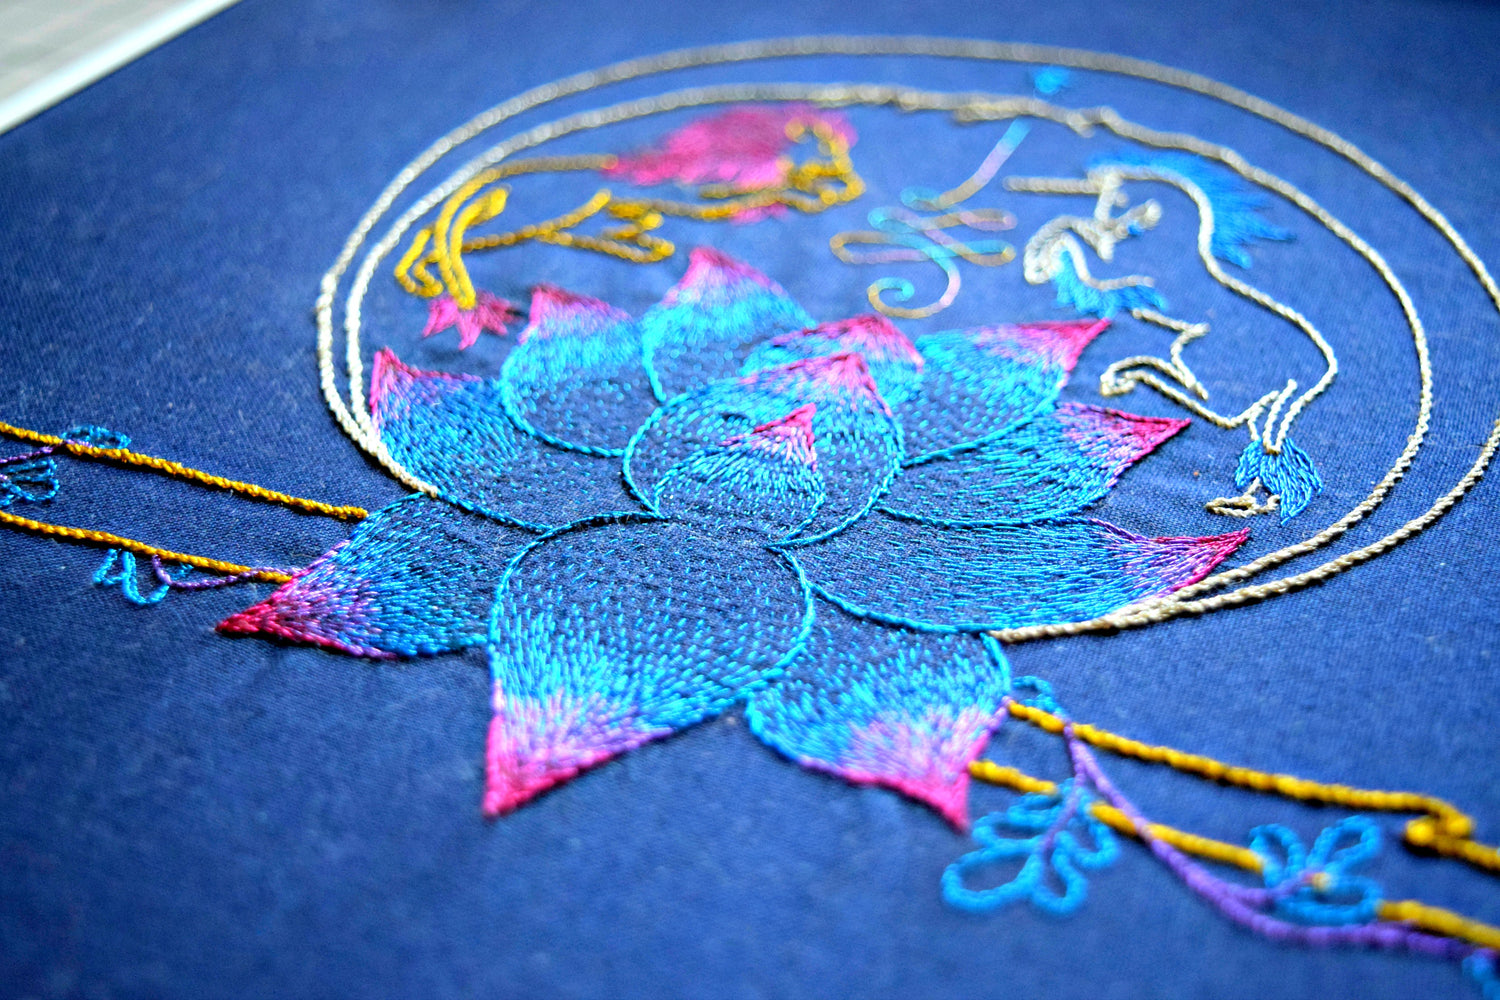 "Journey Talisman" hand embroidered design worked in fine metallic threads on blue background. A shimmering lotus sits between a lion and unicorn encased in a sphere and atop a golden bough